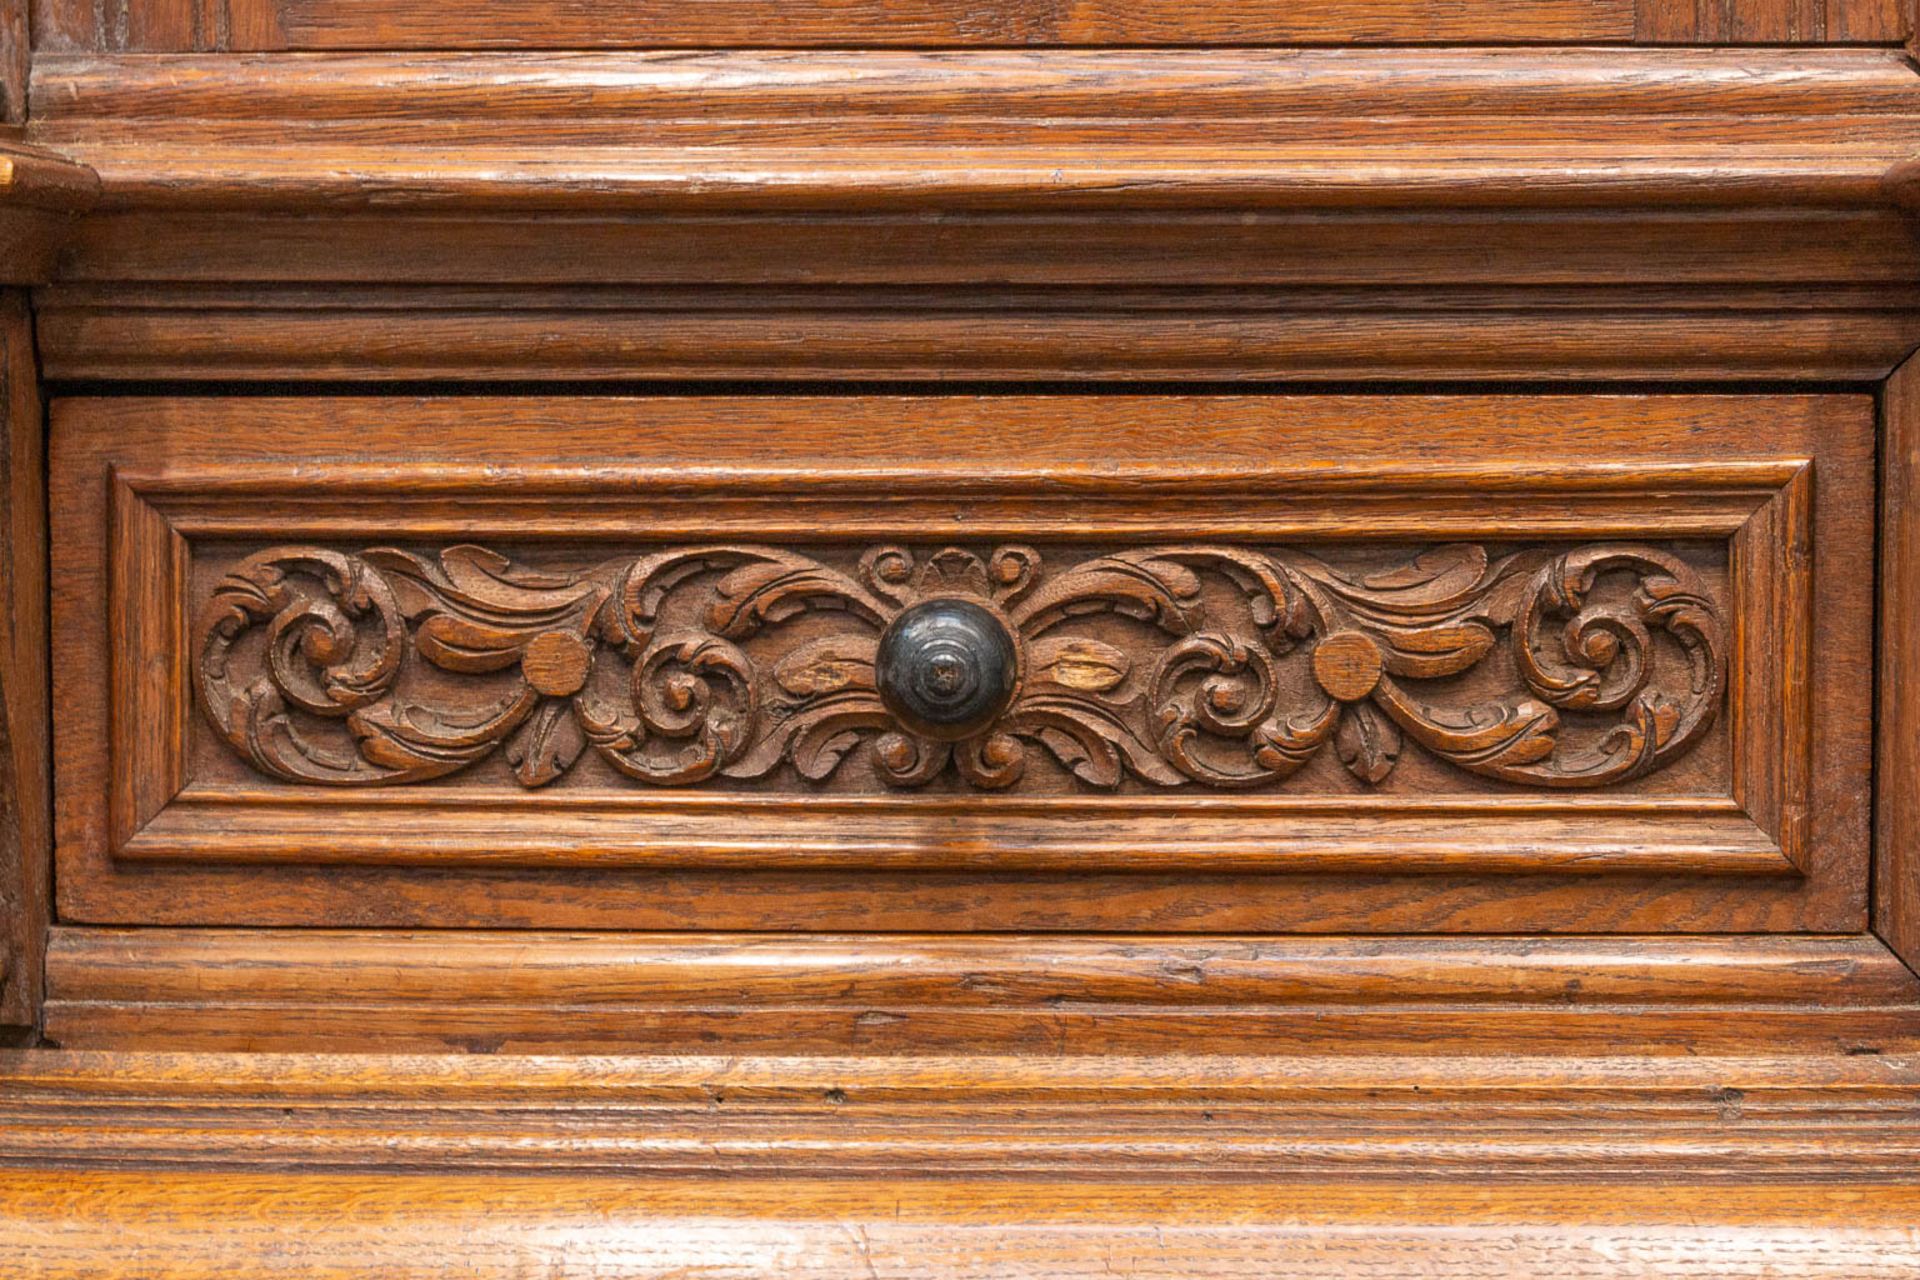 A cabinet, made in Flemish renaissance style, oak with fine sculptures, 19th century. - Image 19 of 27